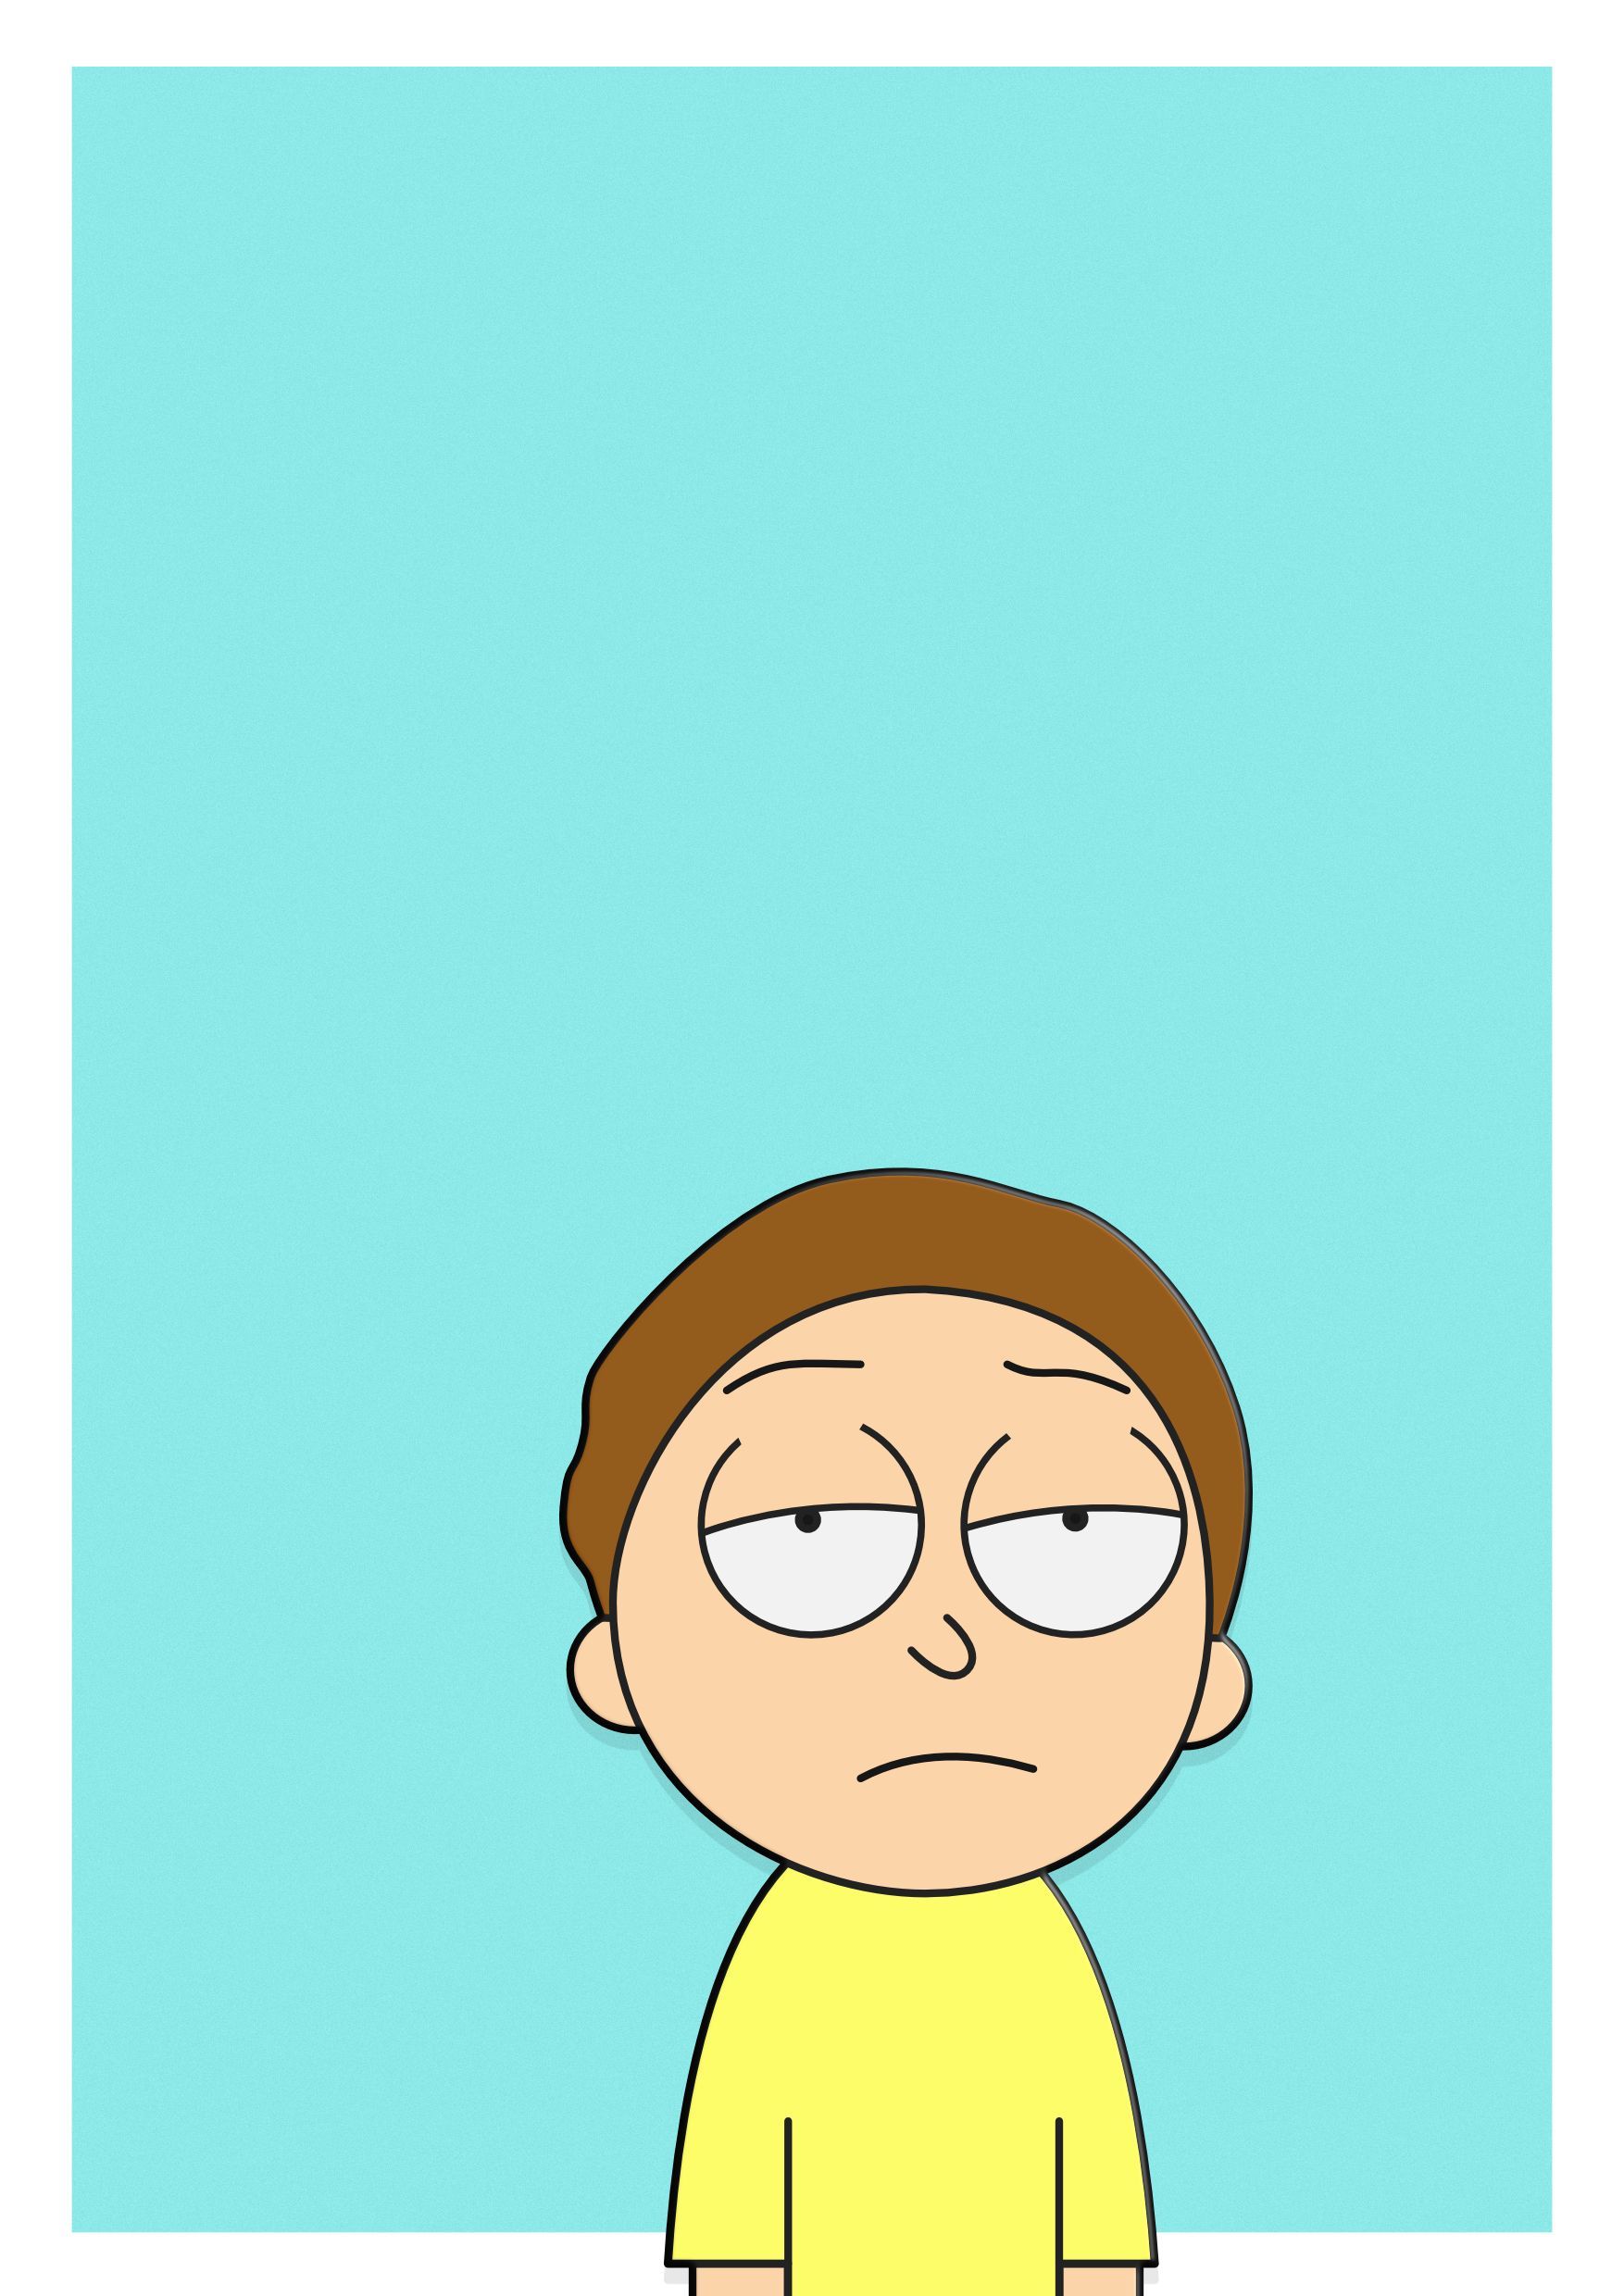 Morty Smith Face Wallpapers